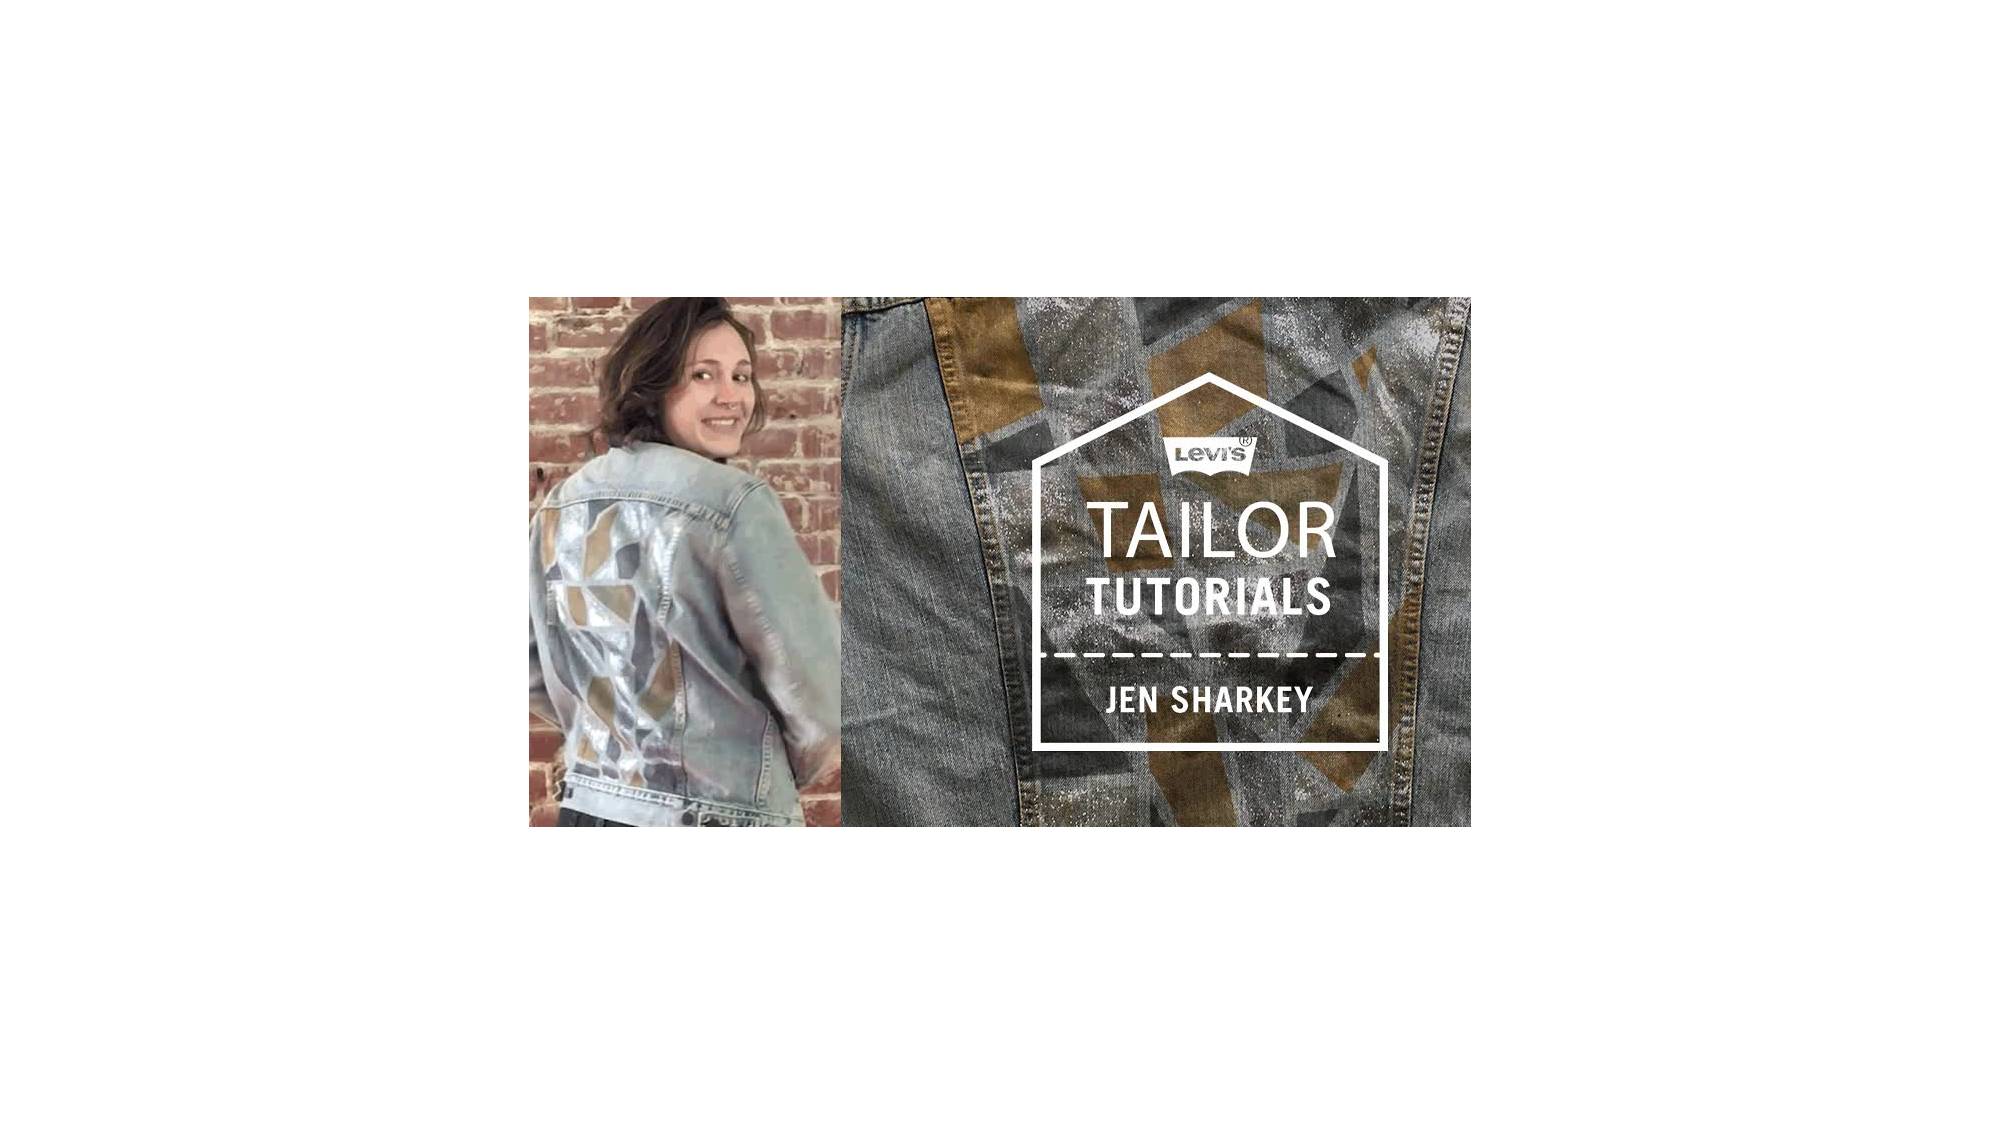 Video of Levi's® Tailor, Jen Sharkey, wearing the customized stained glass trucker jacket she created next to an image of the laydown of the trucker.